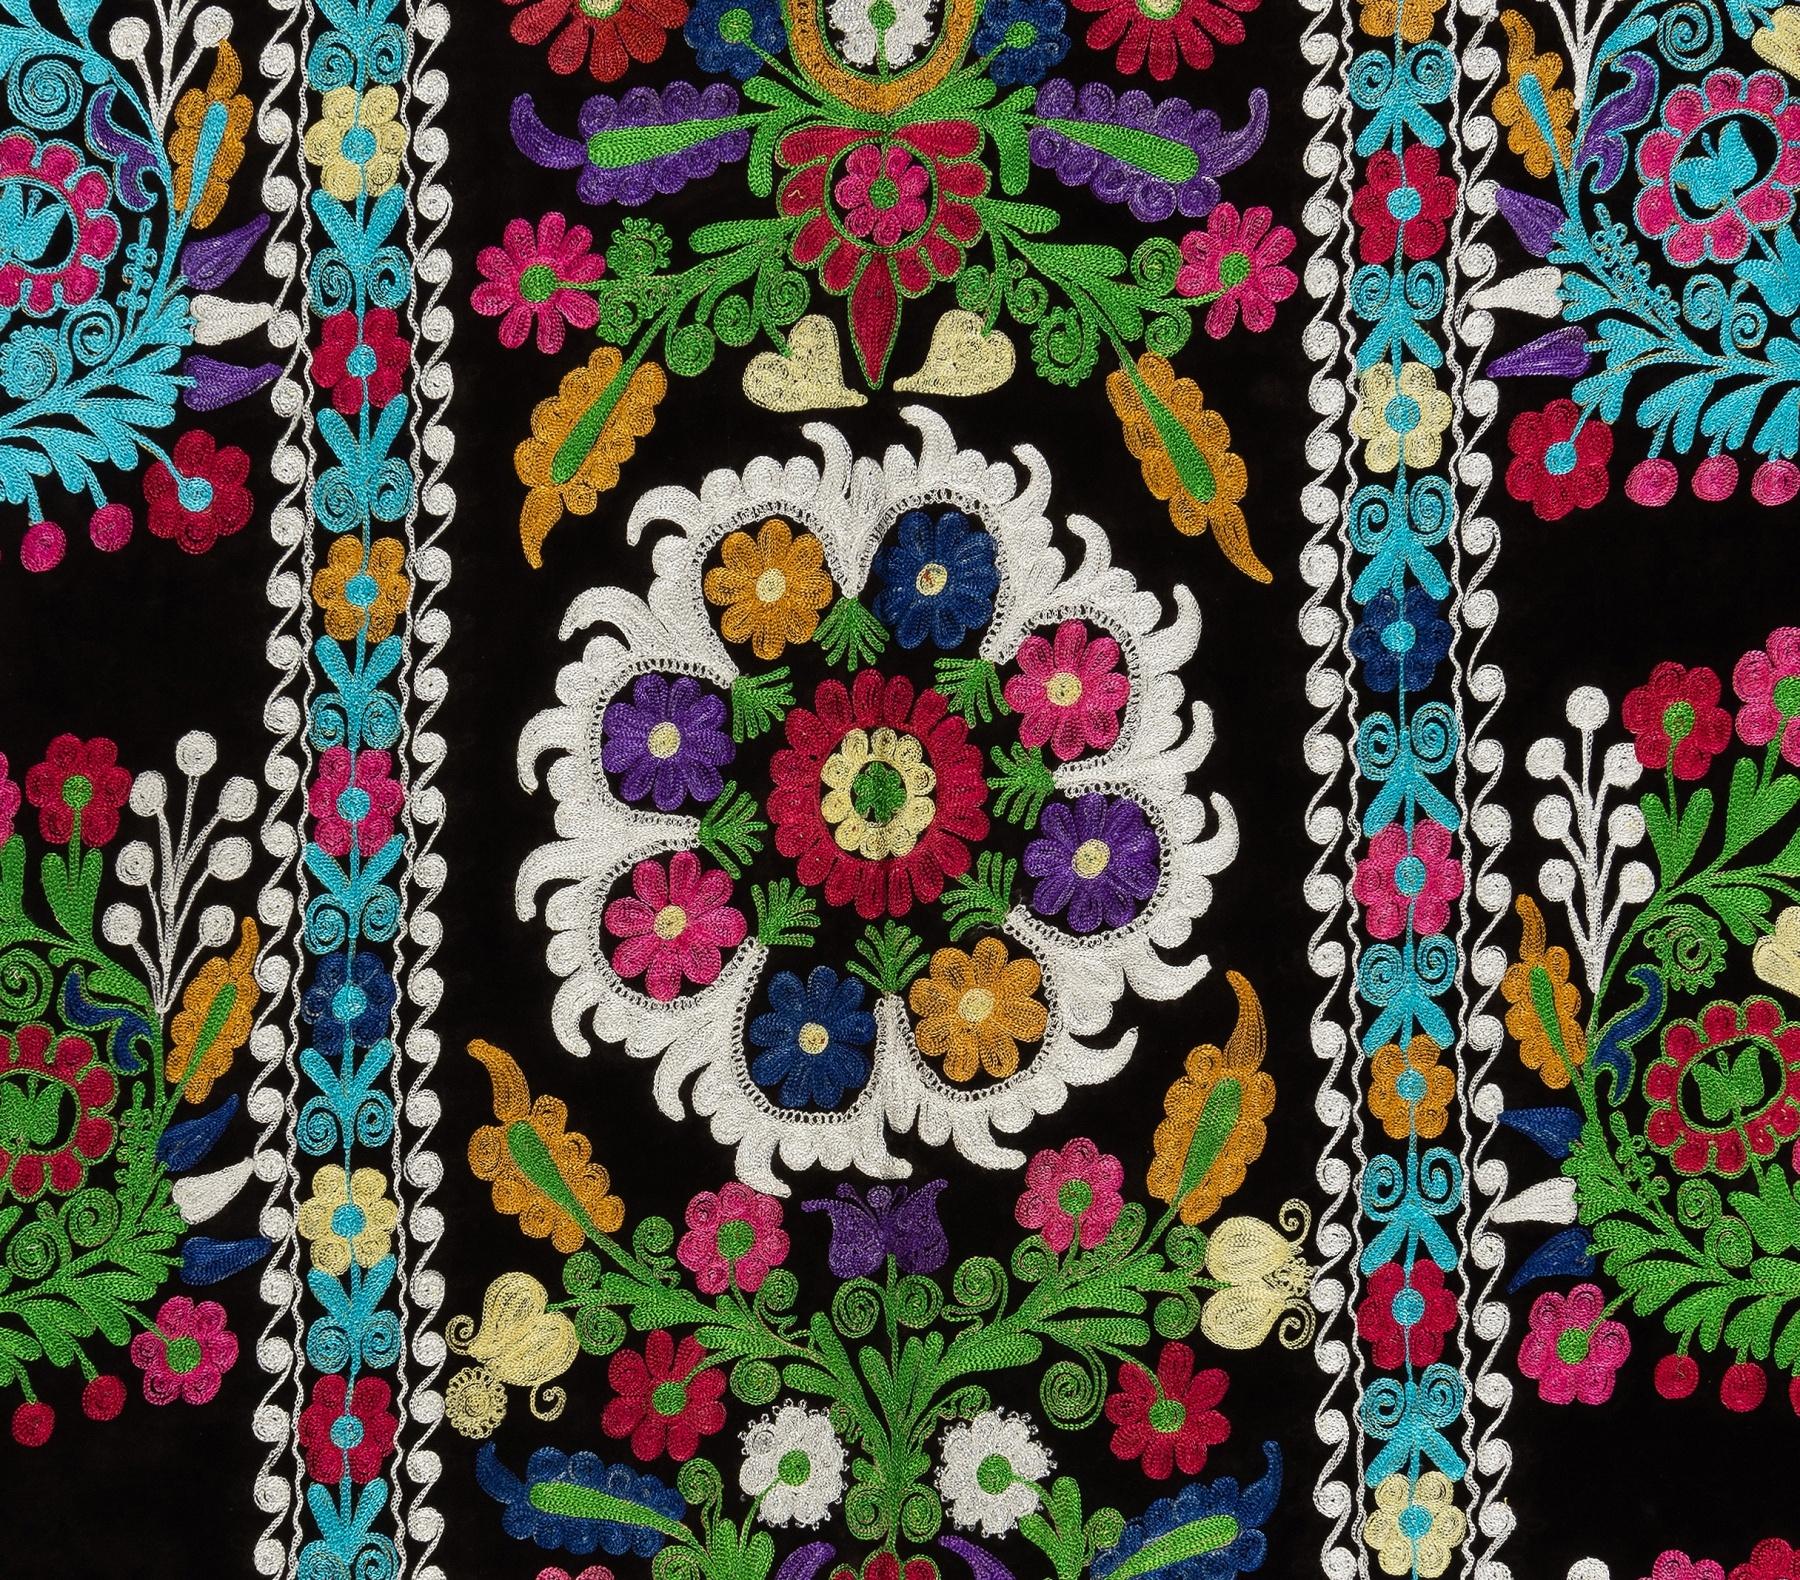 Uzbek 4.6x7.5 Ft Gorgeous Silk Embroidery Suzani Wall Hanging, Needlework Table Cover For Sale